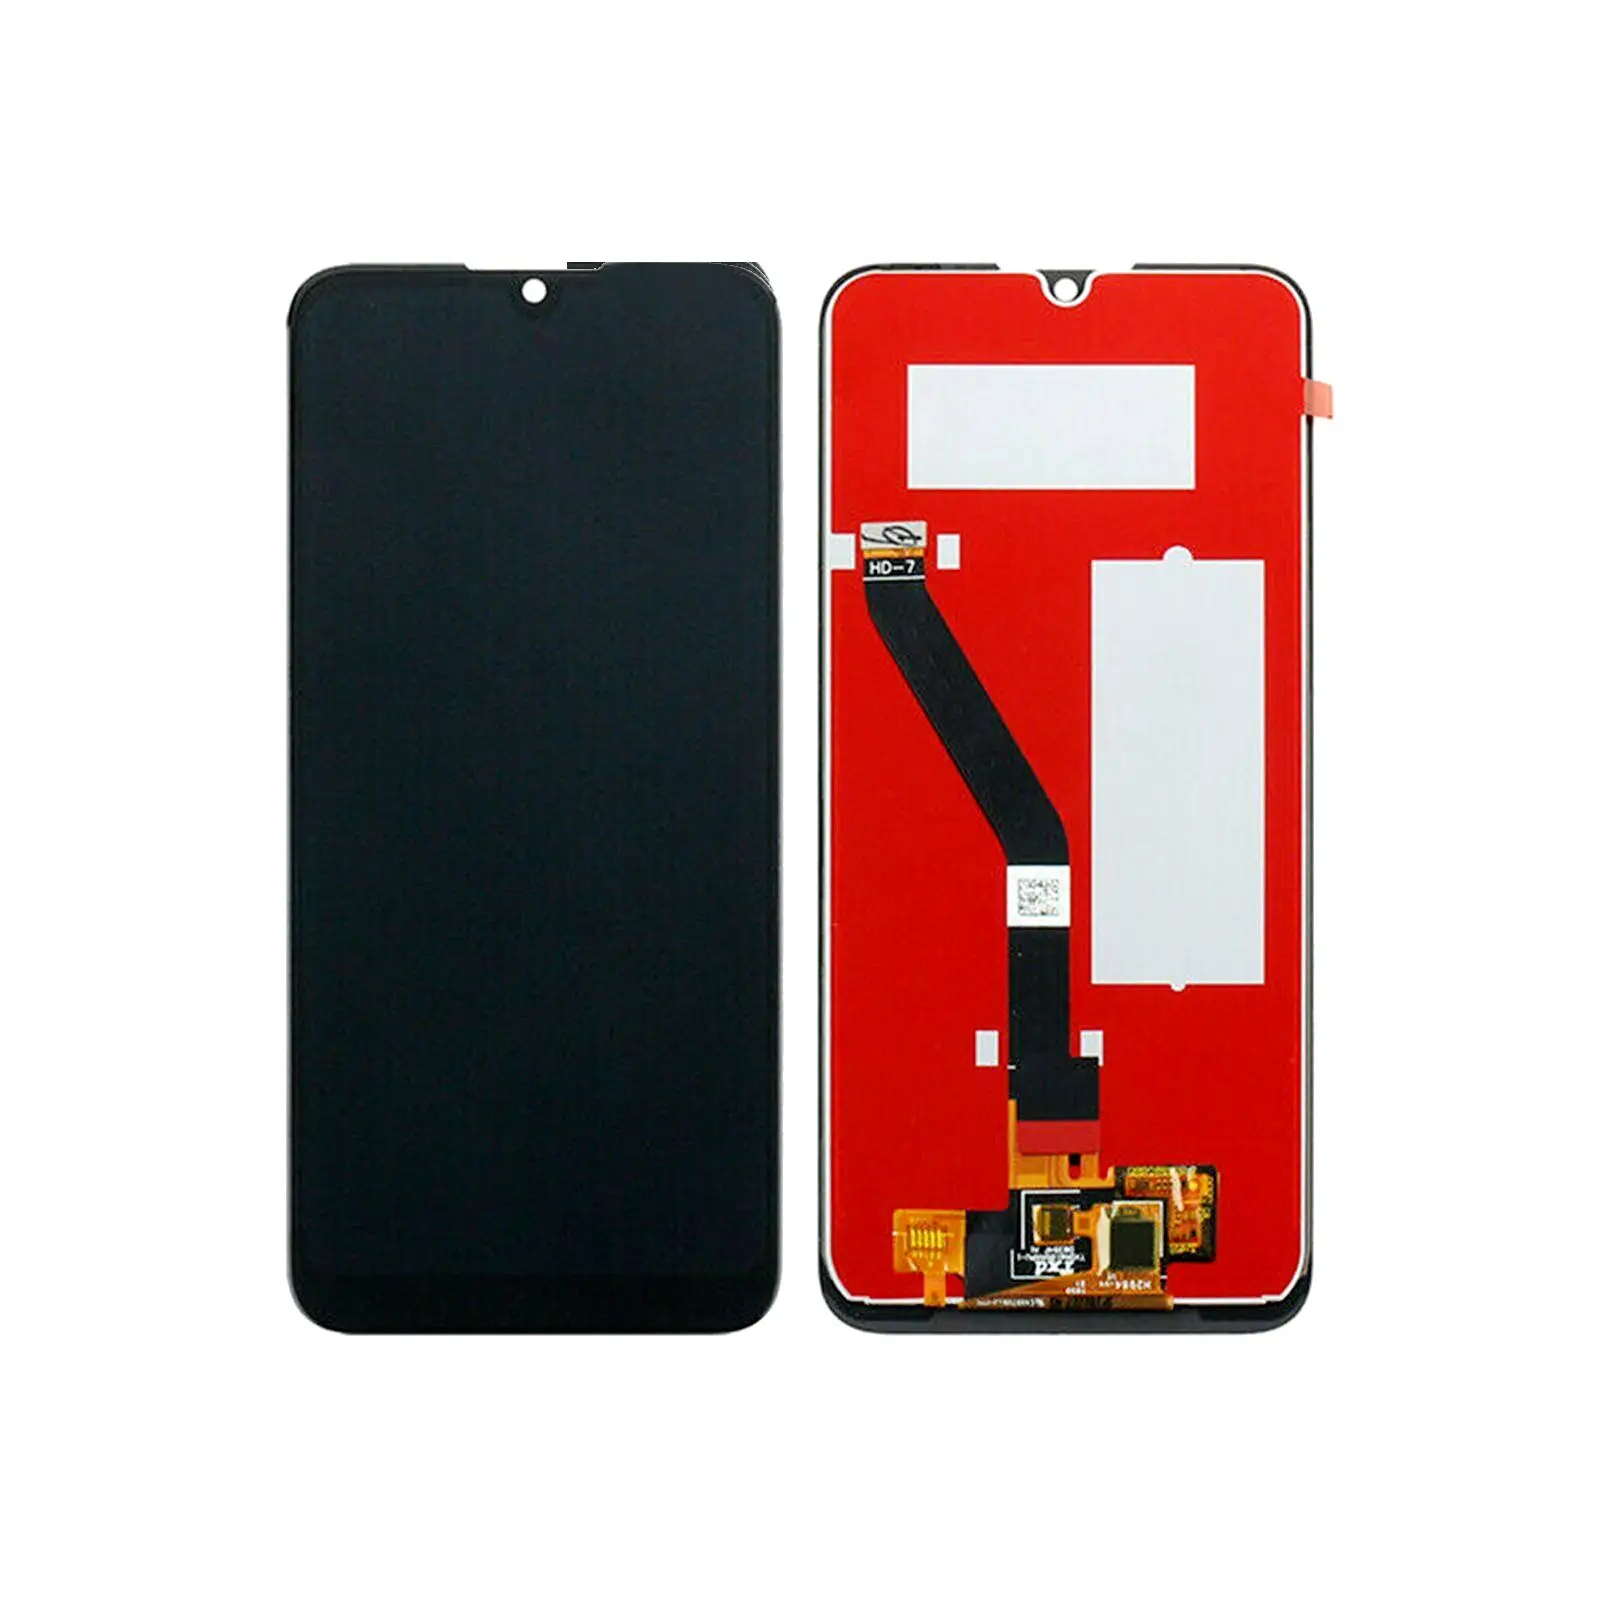 Factory Sale 11 16 17 20 24 37 Pin LCD Screen Digitizer Assembly Replacement For TECNO T528 T472 T662 T484 17 Pin Lcd